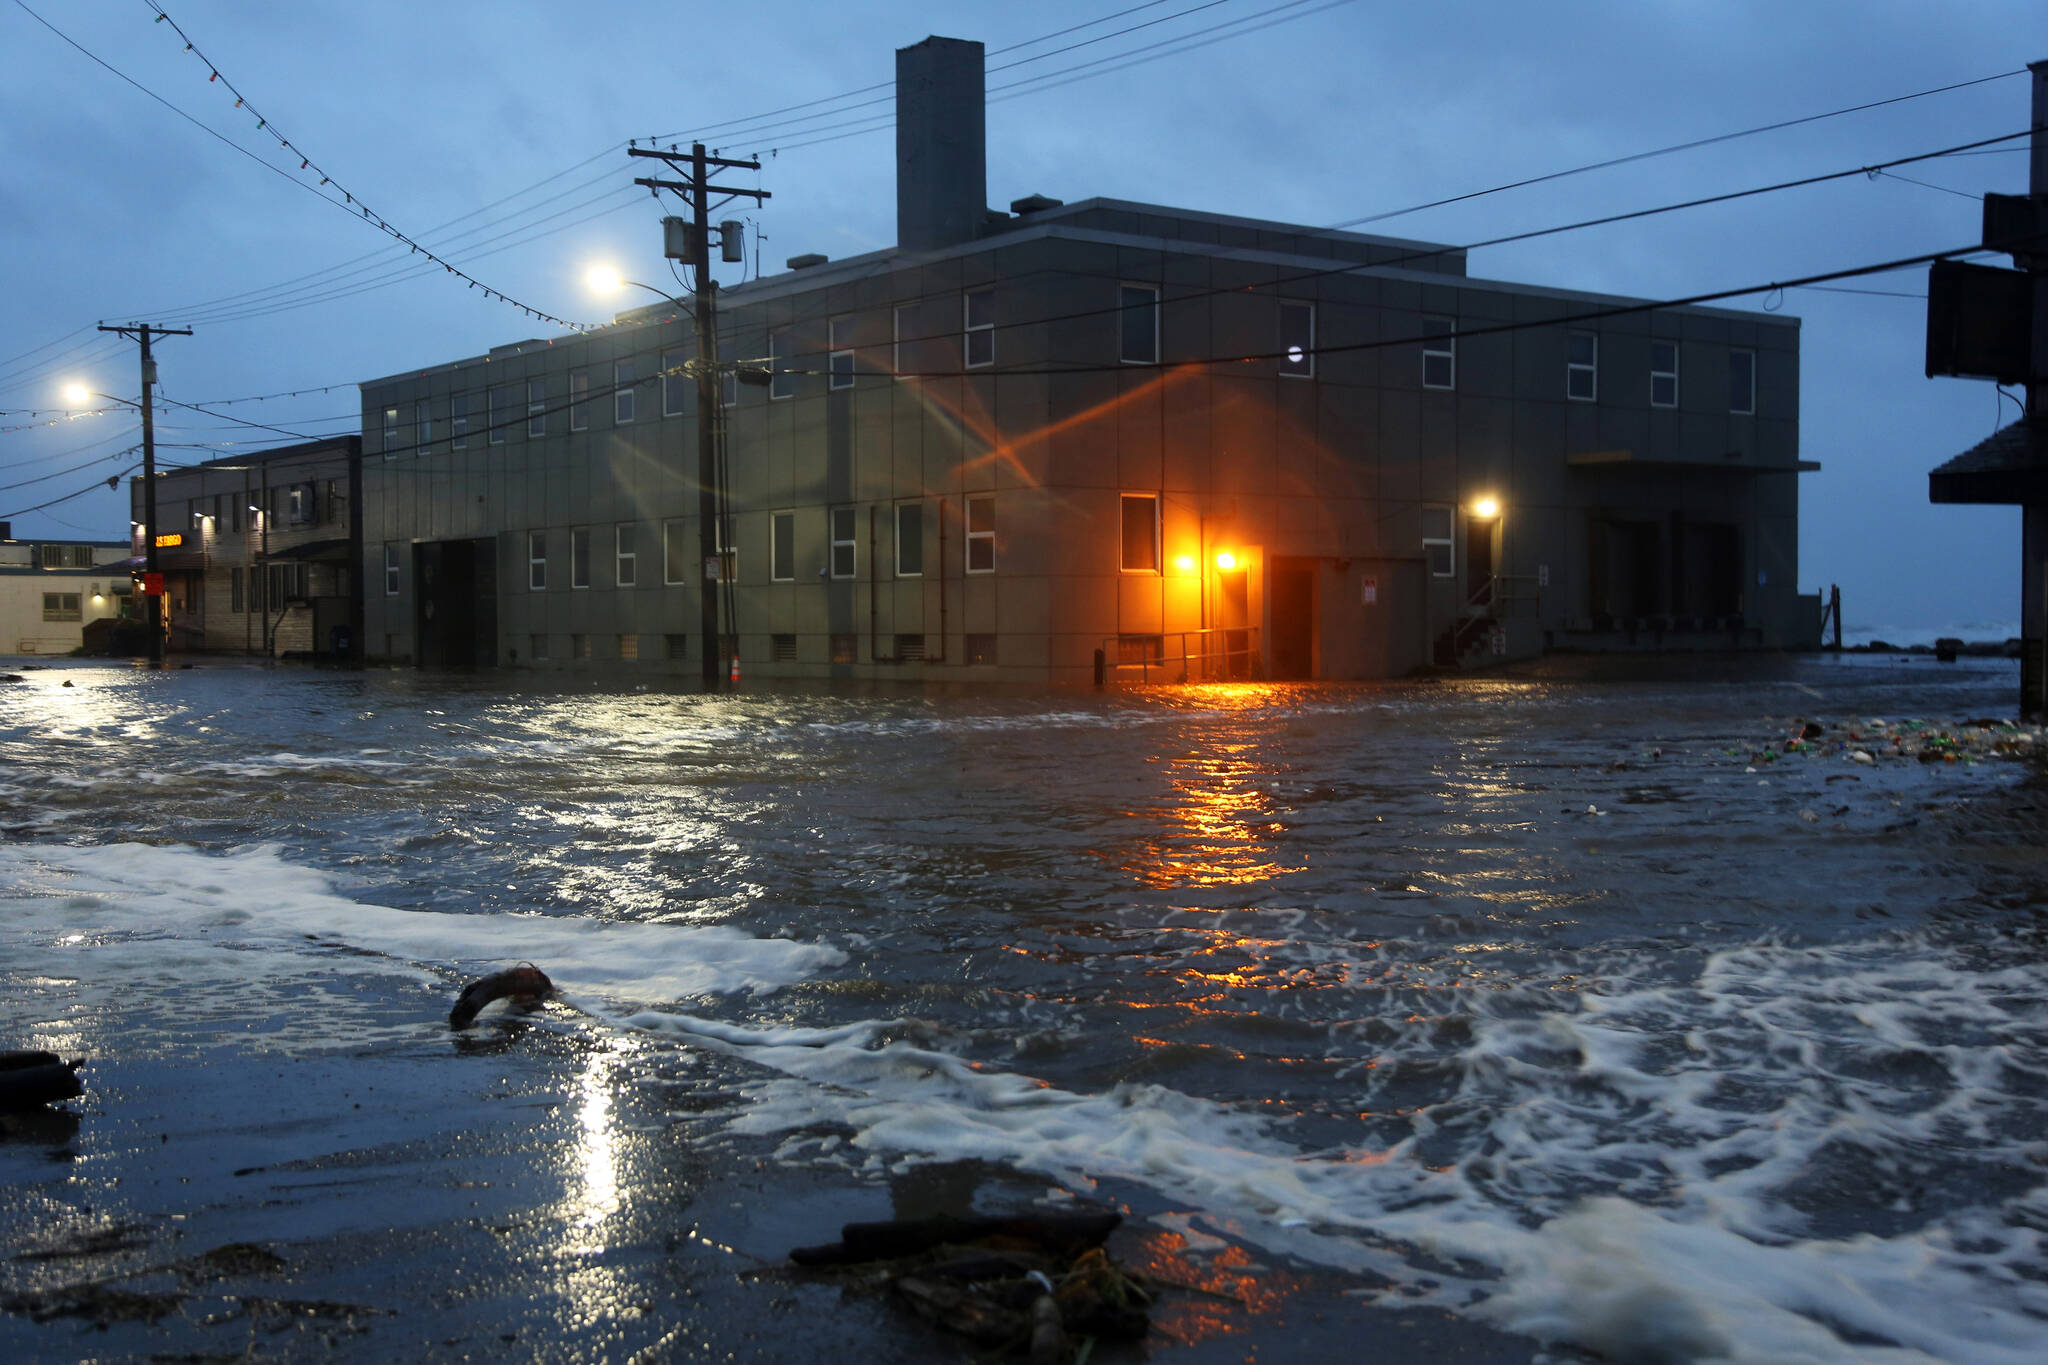 Water rushes down Front Street, just a half block from the Bering Sea, in Nome, Alaska, on Saturday, Sept. 17, 2022 as the remnants of Typhoon Merbok moved into the region. It was a massive storm system — big enough to cover the mainland U.S. from the Pacific Ocean to Nebraska and from Canada to Texas. It influenced weather systems as far away as California, where a rare late-summer storm dropped rain on the northern part of the state, offering a measure of relief to wildfire crews but also complicating fire suppression efforts because of mud and loosened earth. (AP Photo / Peggy Fagerstrom)